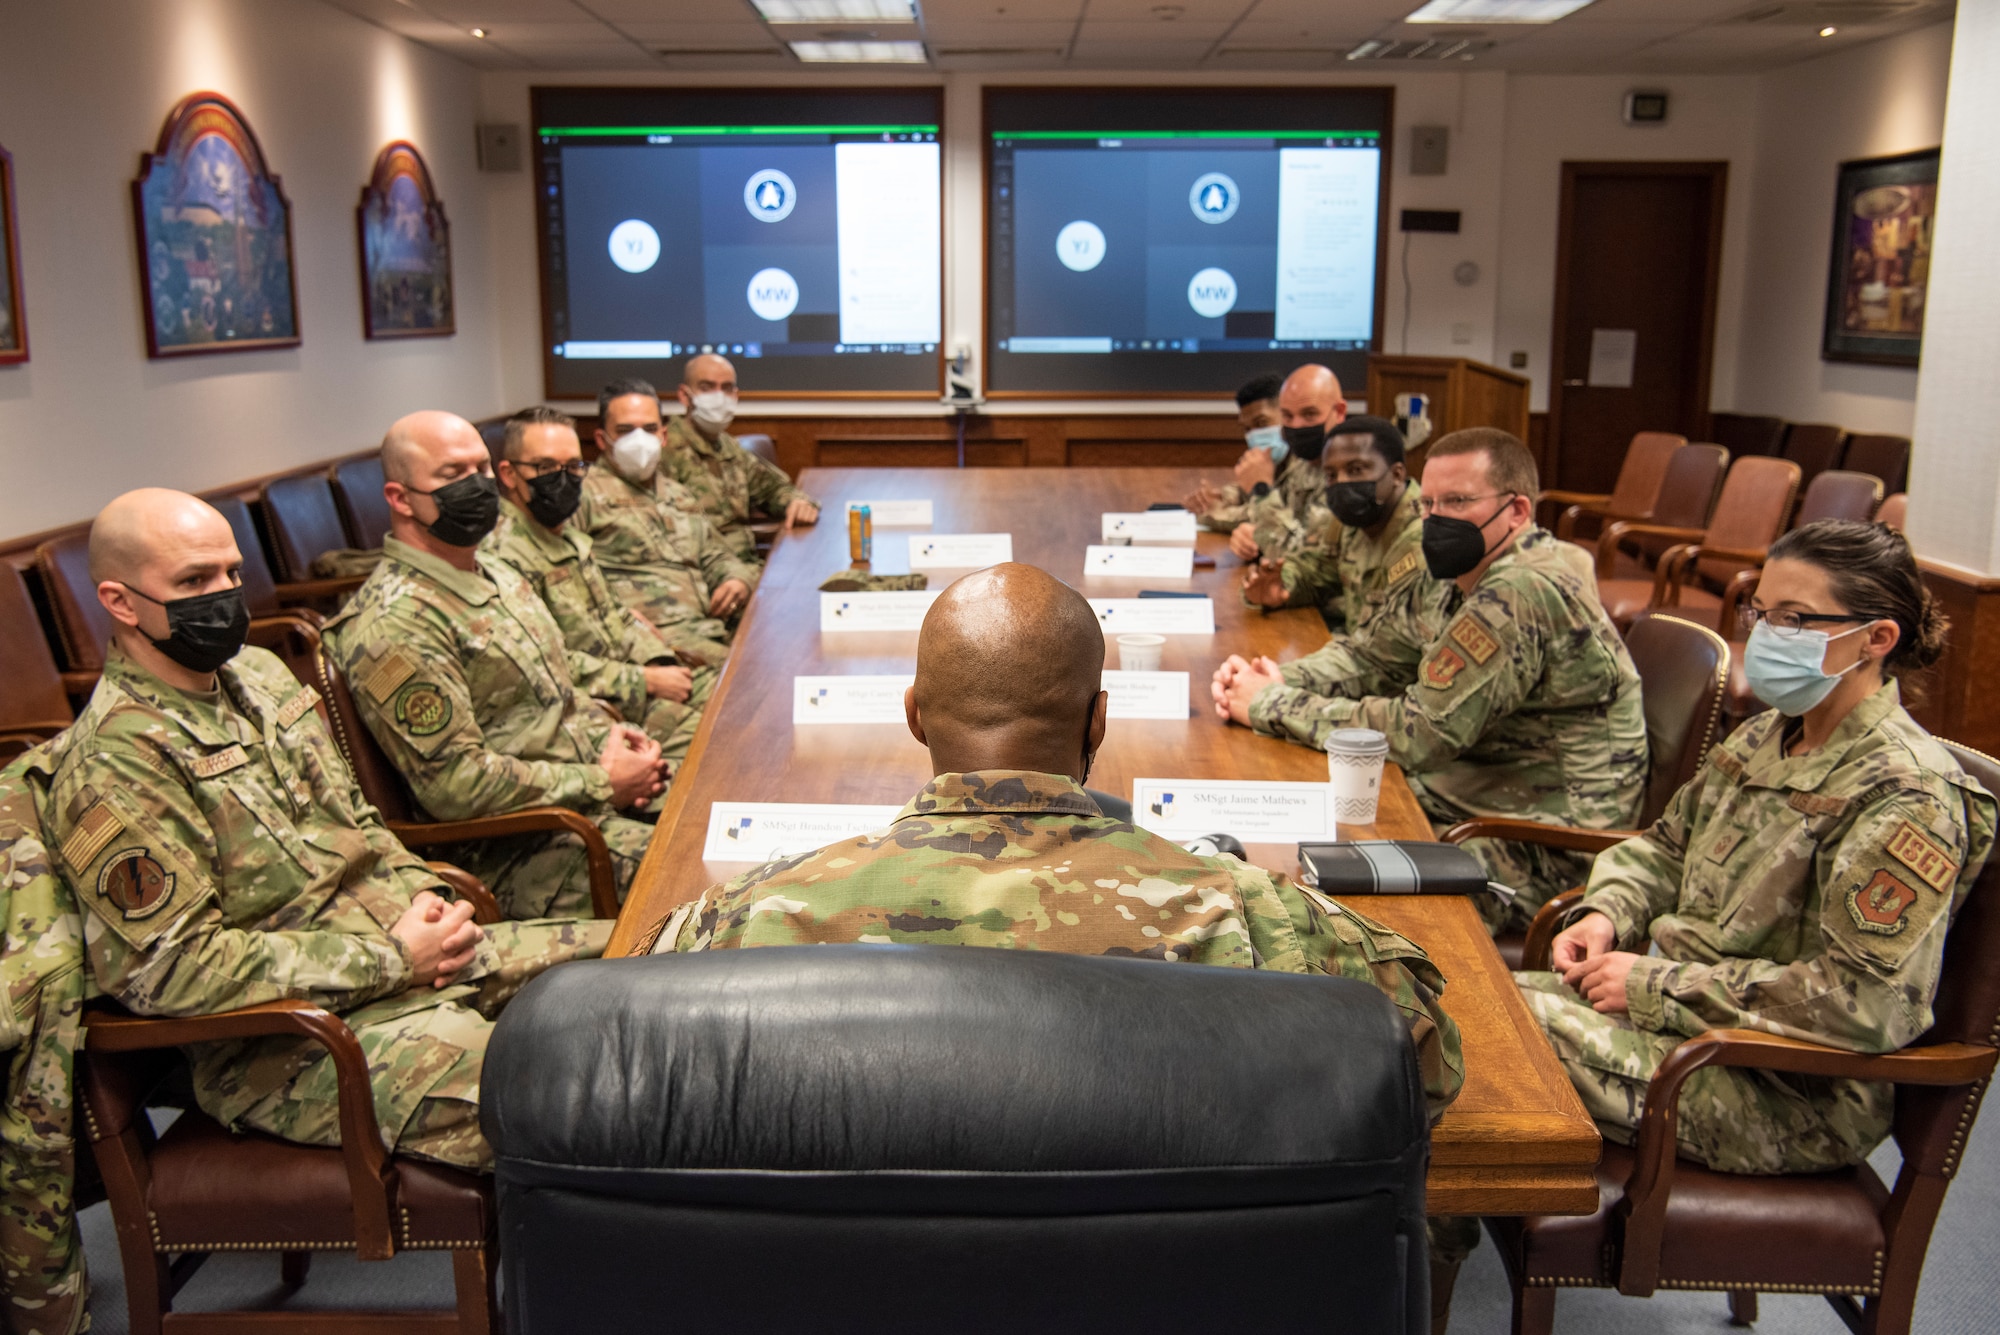 U.S. Air Force Chief Master Sgt. Mike Perry, Air Force first sergeant special duty manager, center, gives mentorship to 52nd Fighter Wing first sergeants in a conference room, Dec. 2, 2021, on Spangdahlem Air Base, Germany. Perry has served in a variety of leadership positions at the squadron, group, and MAJCOM levels. His duties have included tours as a first sergeant, group superintendent, and MAJCOM functional manager. (U.S. Air Force photo by Airman 1st Class Marcus Hardy-Bannerman)